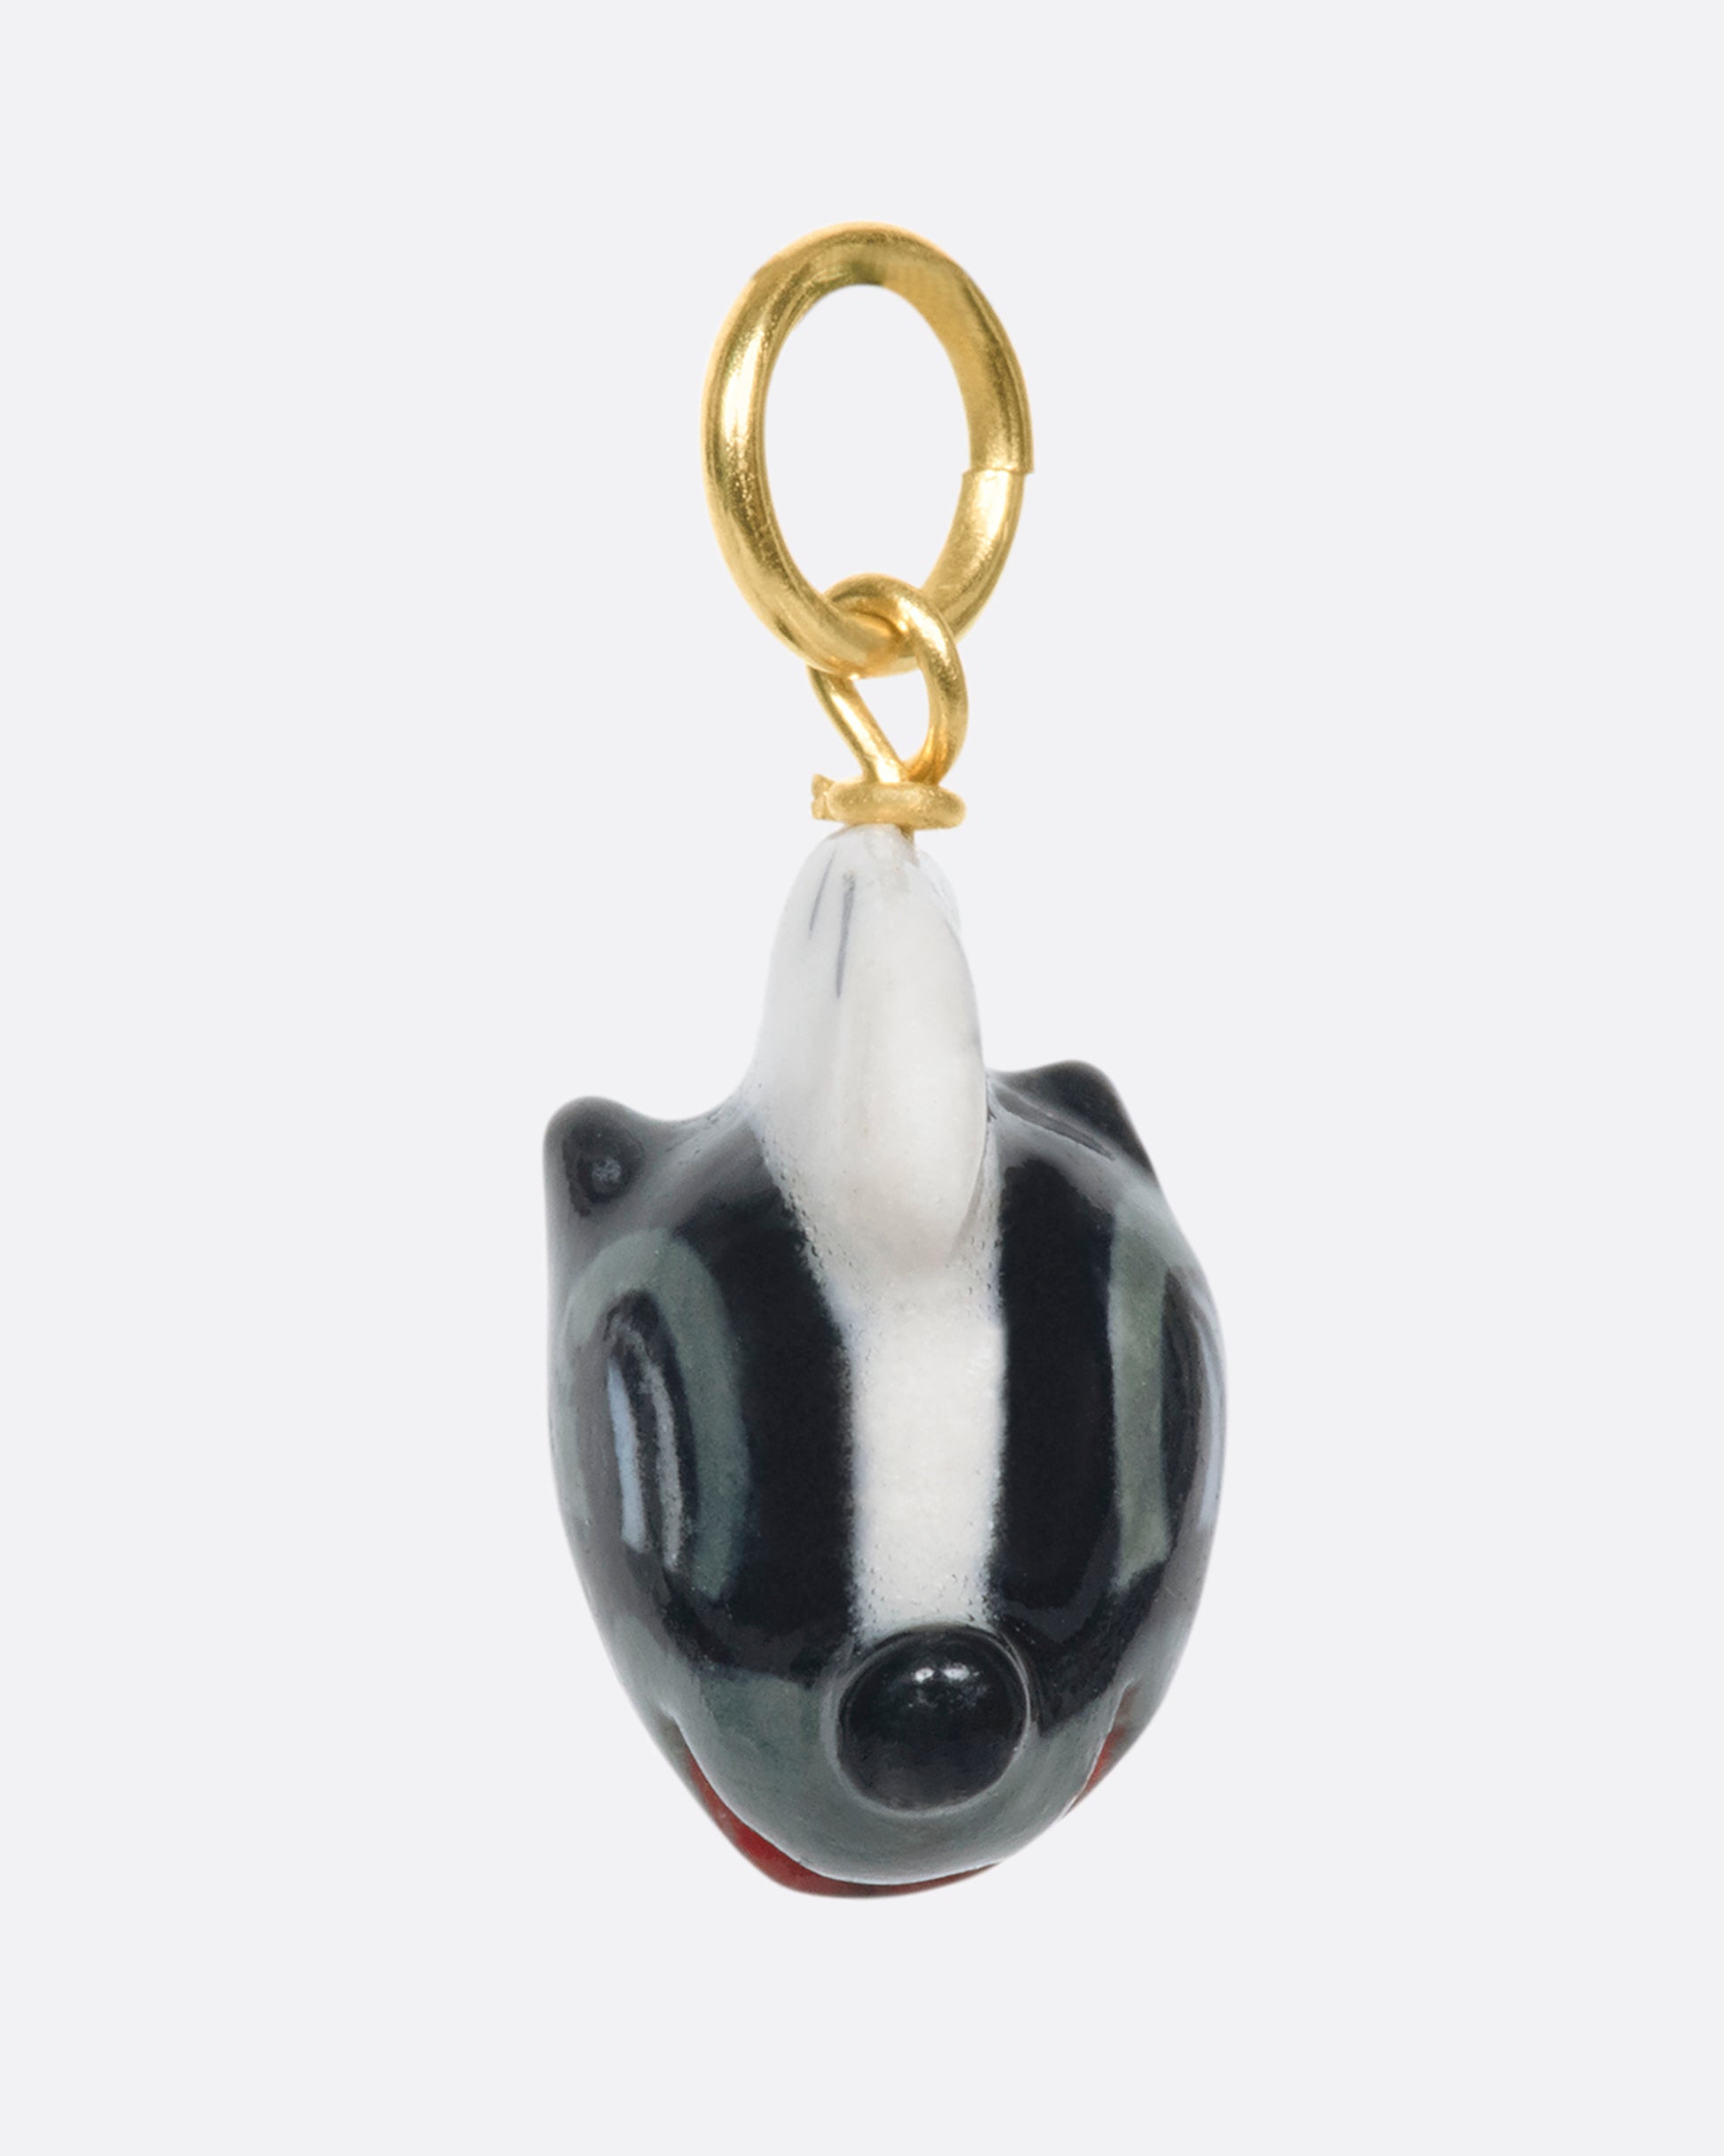 A handmade and painted porcelain Flower the Skunk charm with a 14k gold bail.